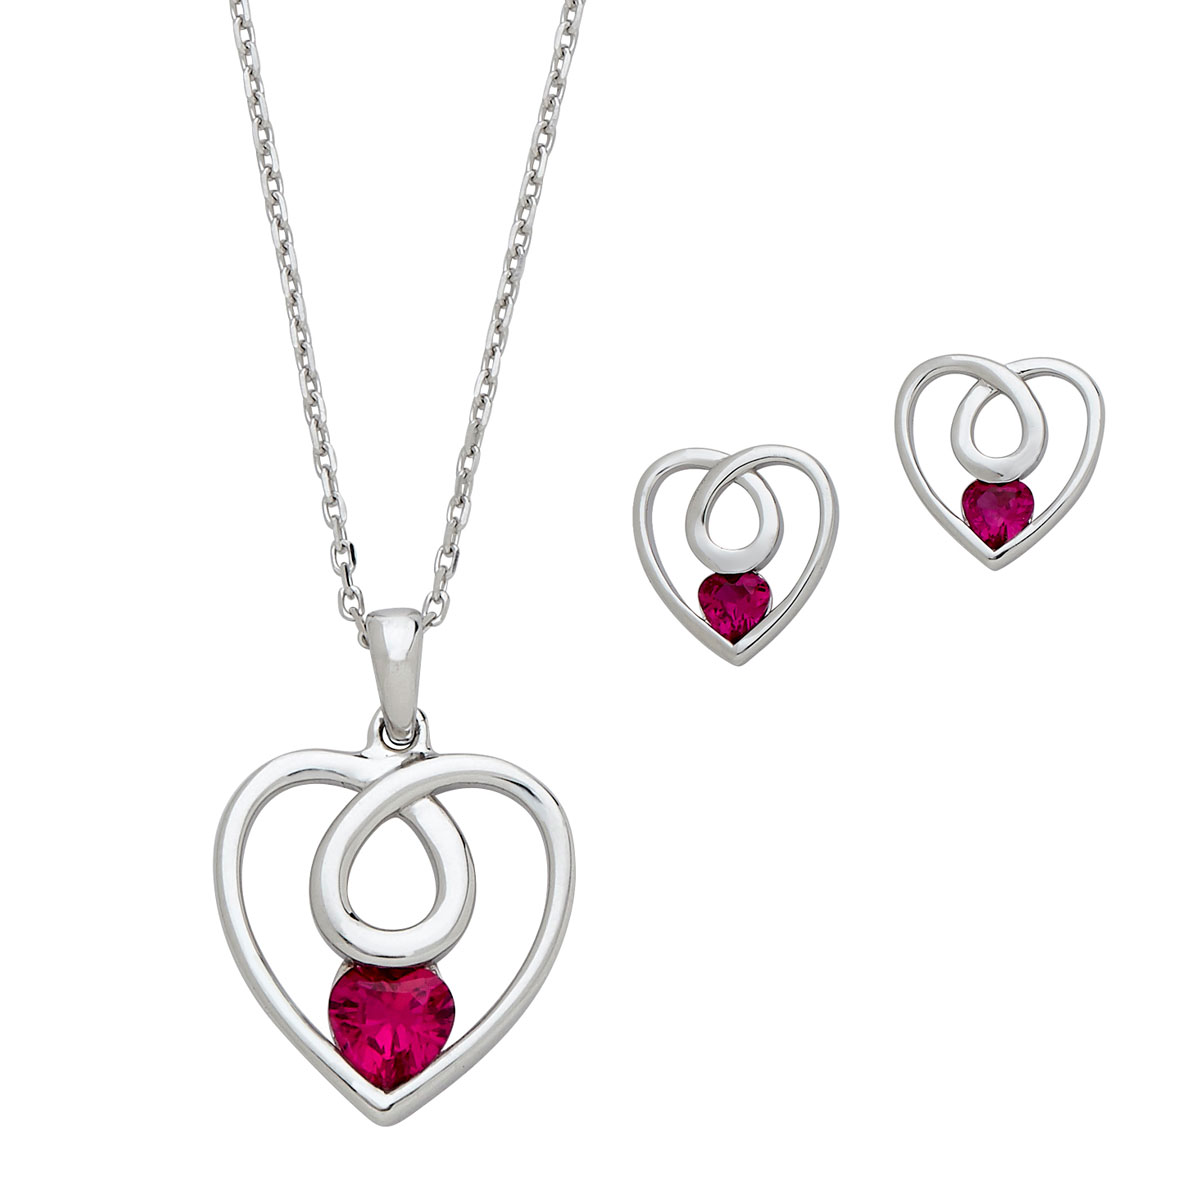 Silver Loop Heart High Polish with a Heart Shape Ruby Colored CZ Pendant and Earring Set